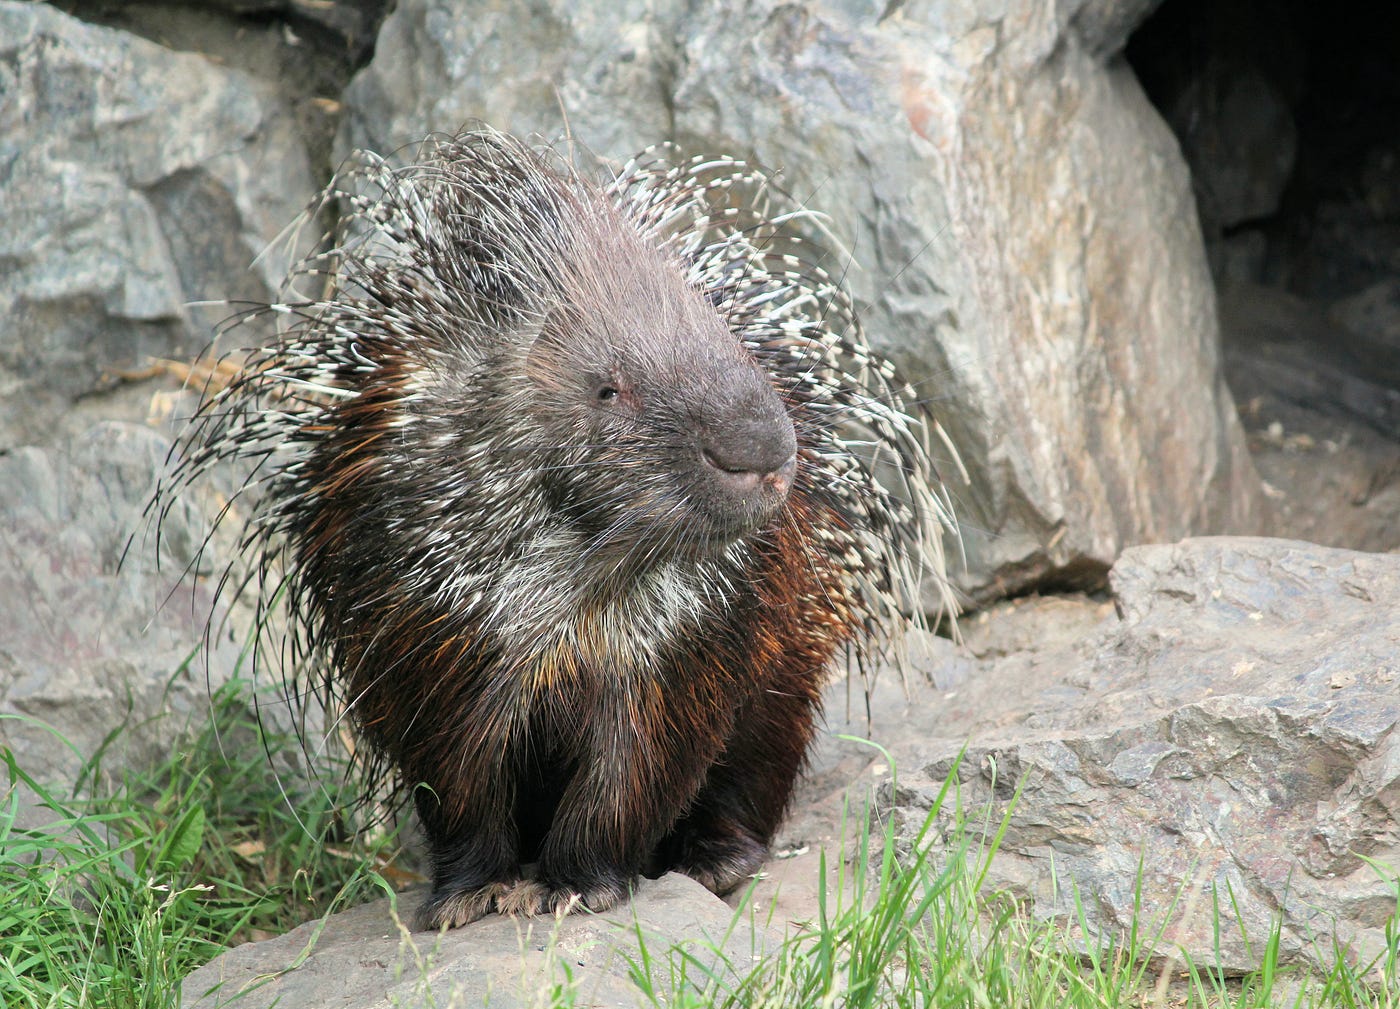 Can Porcupines Shoot Their Quills?